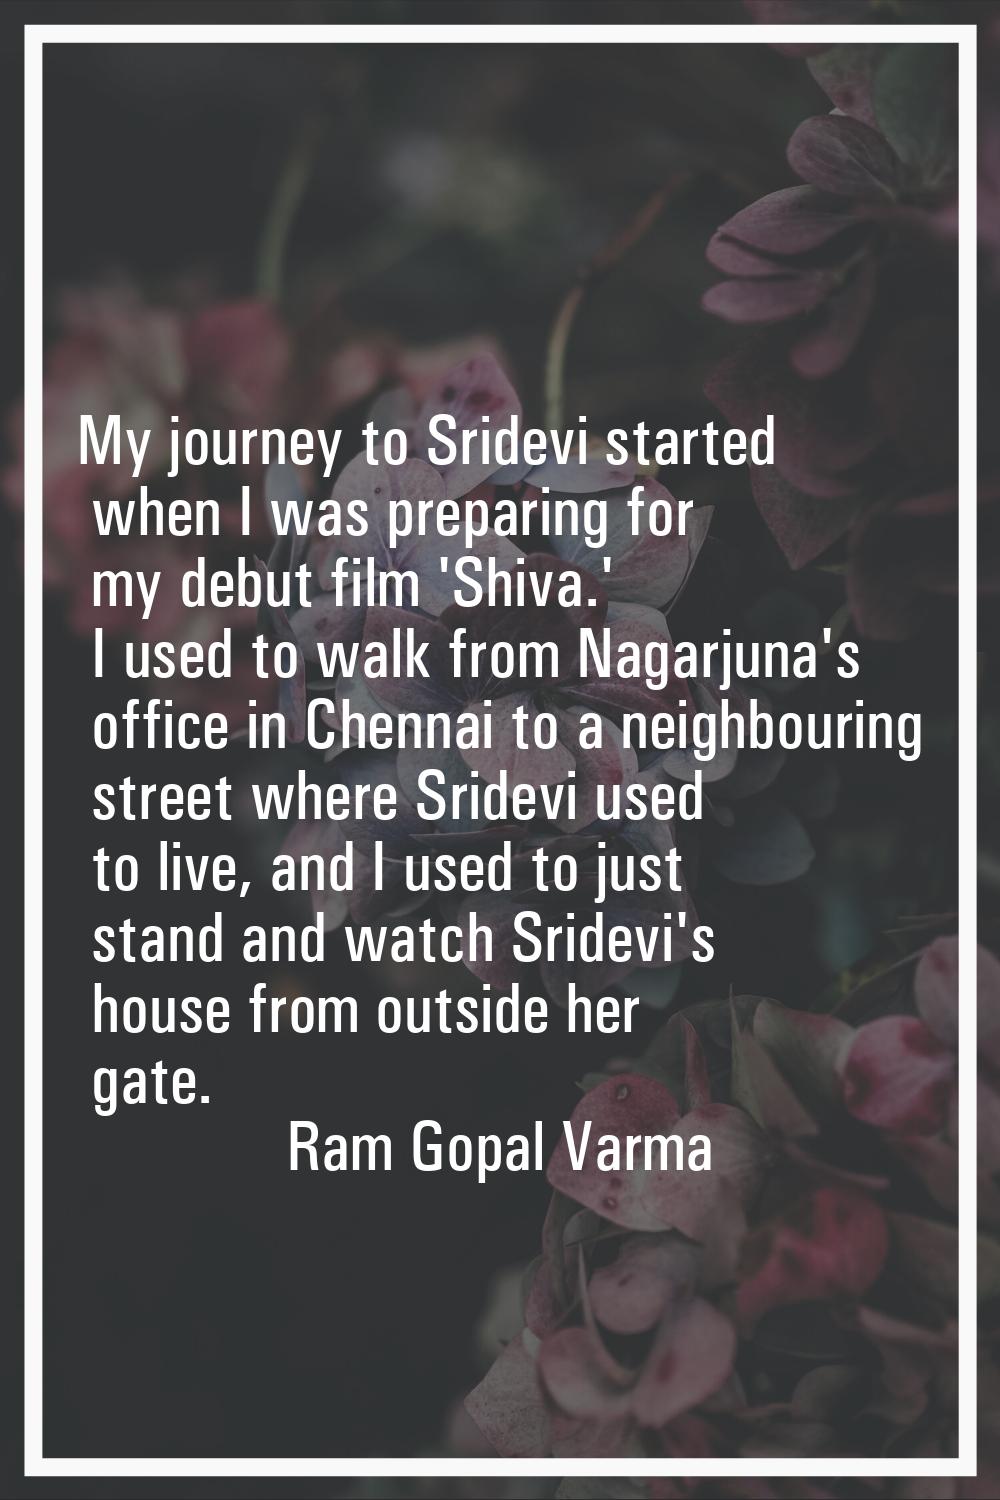 My journey to Sridevi started when I was preparing for my debut film 'Shiva.' I used to walk from N